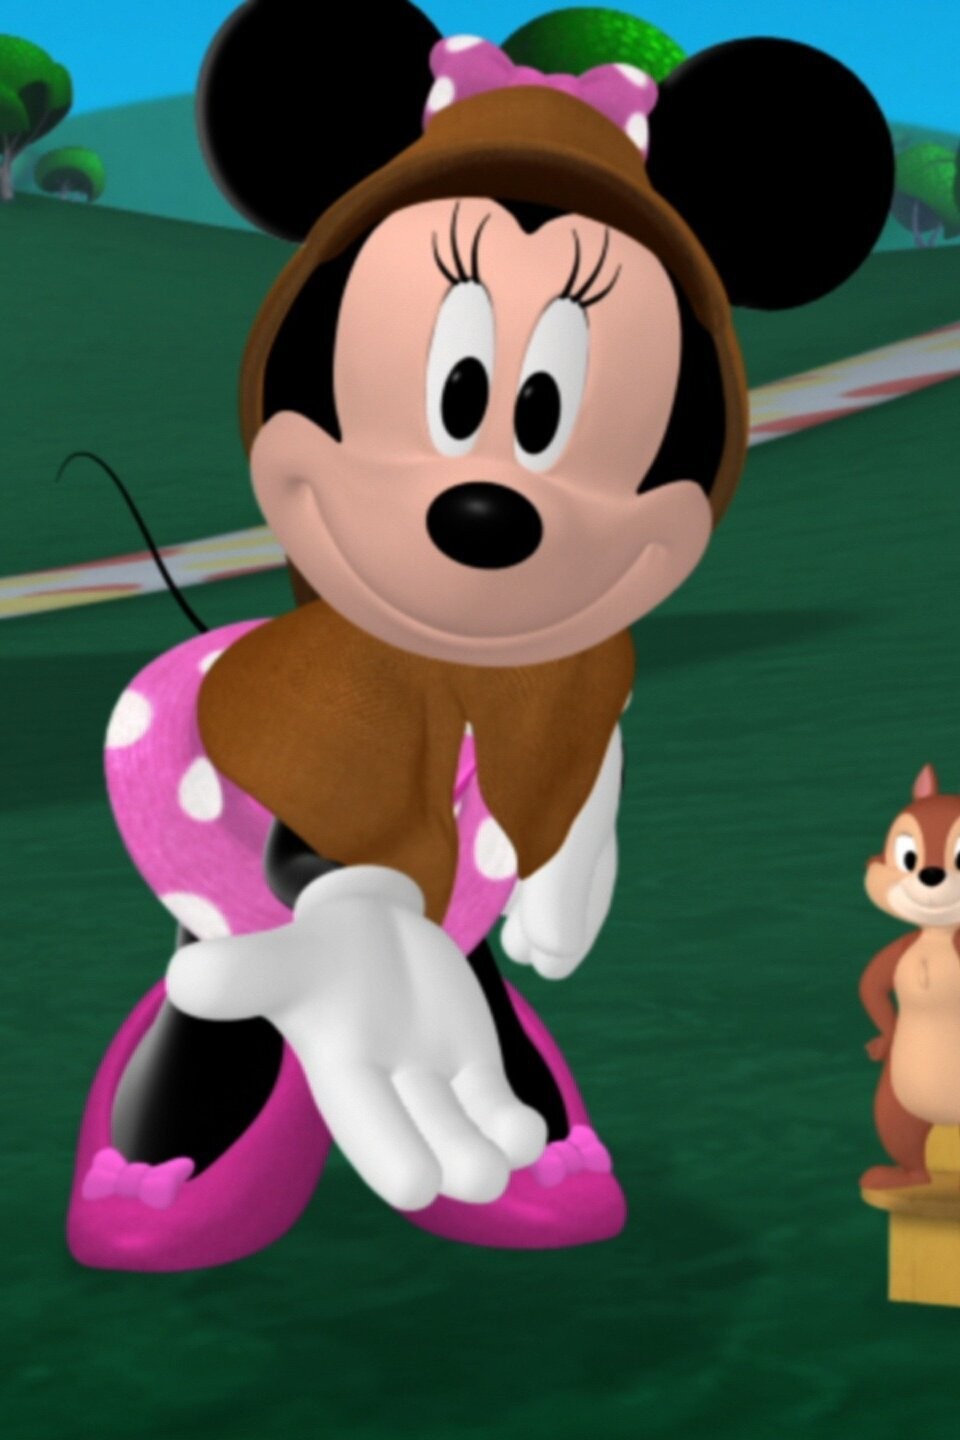 Cartoon Crave on X: 23 episodes of 'Mickey Mouse Clubhouse' have